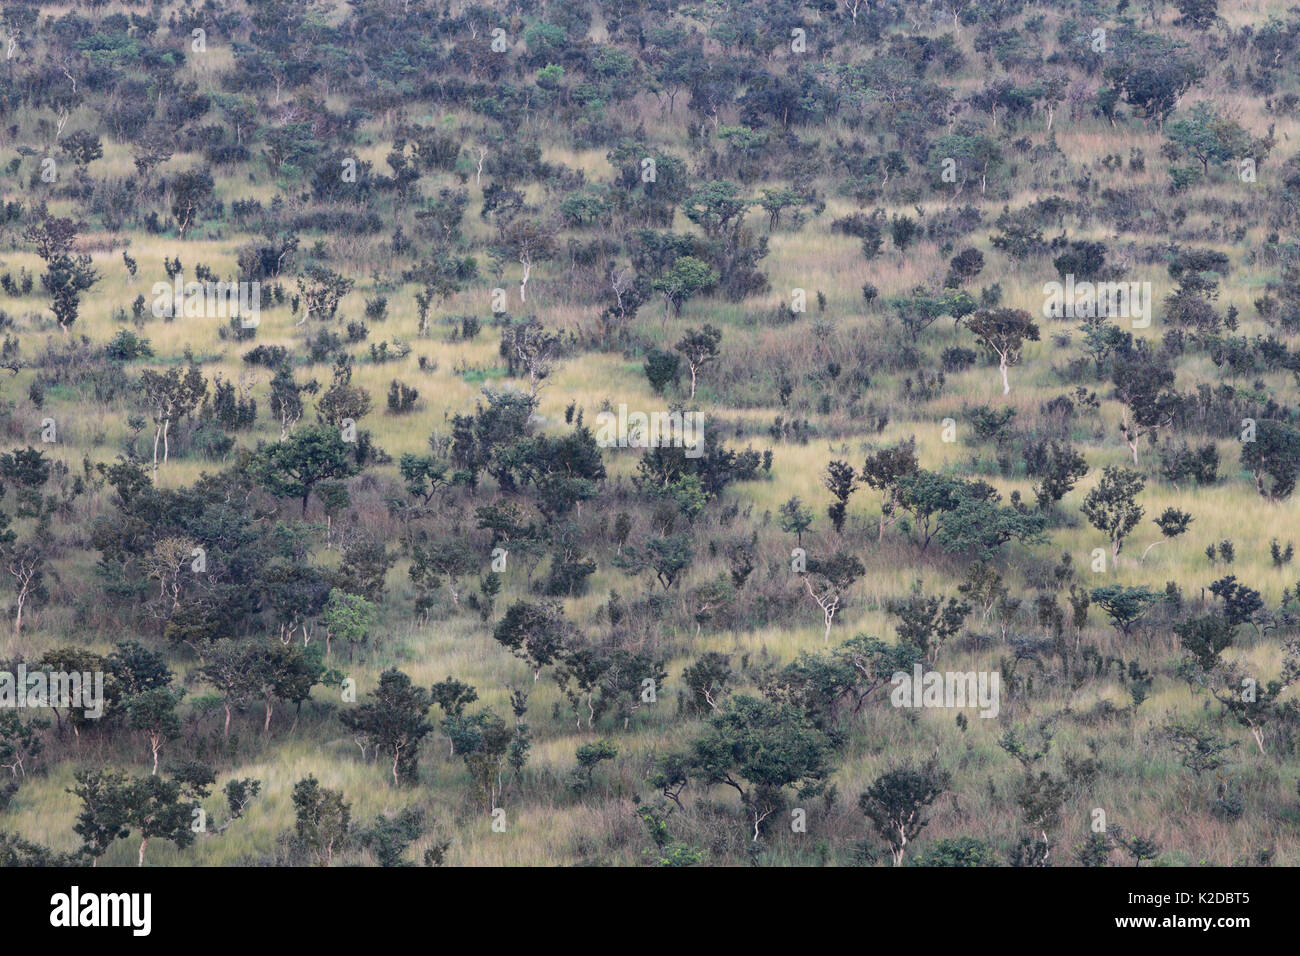 Aerial view of patchwork of savannah and gallery forest, Bateke Plateau NP, Gabon. Stock Photo